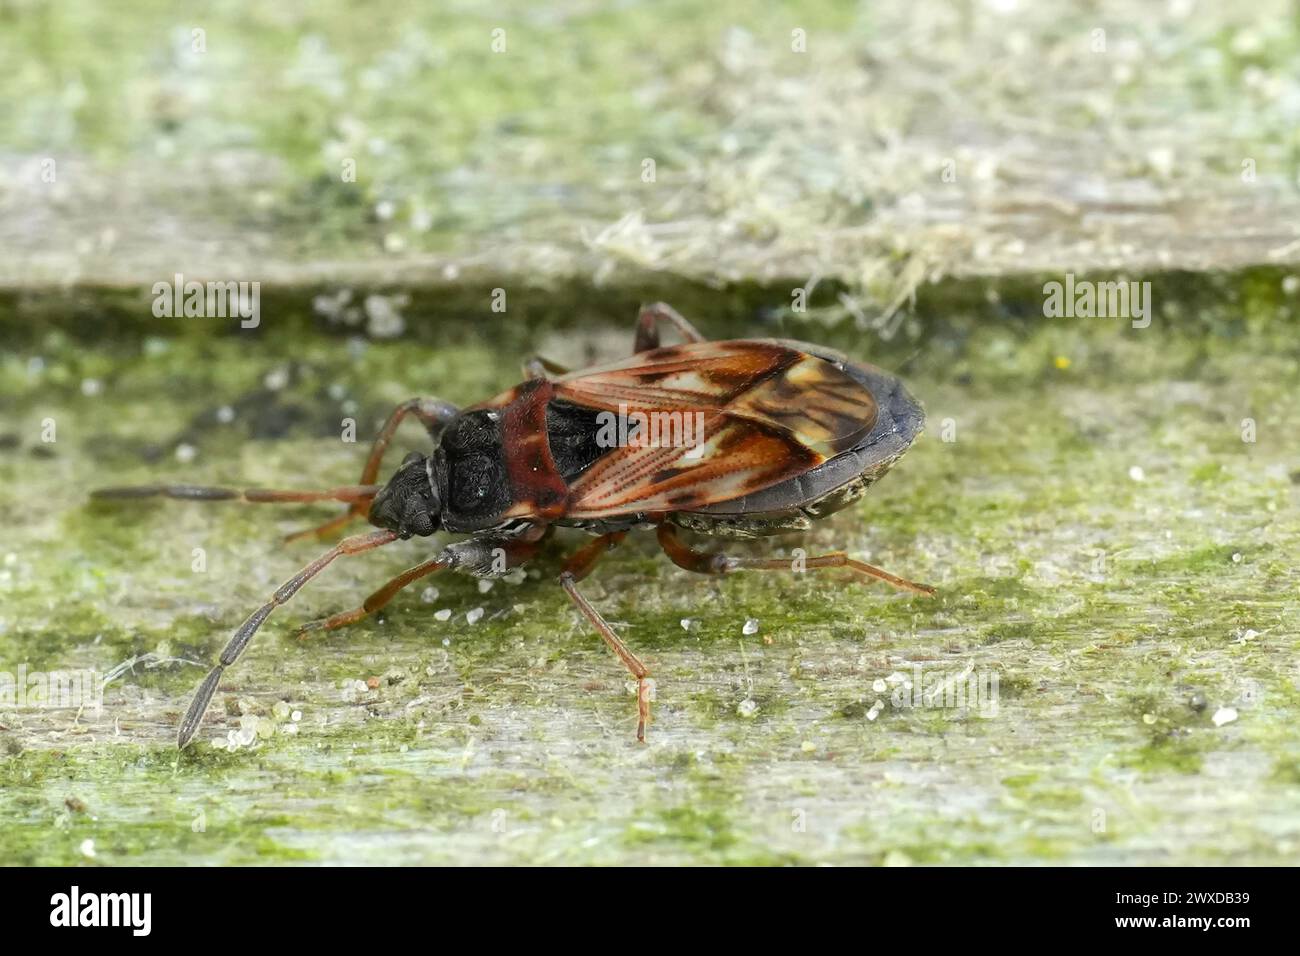 Natural closeup on a very small ground bug, Scolopostethus affinis, sitting on wood Stock Photo